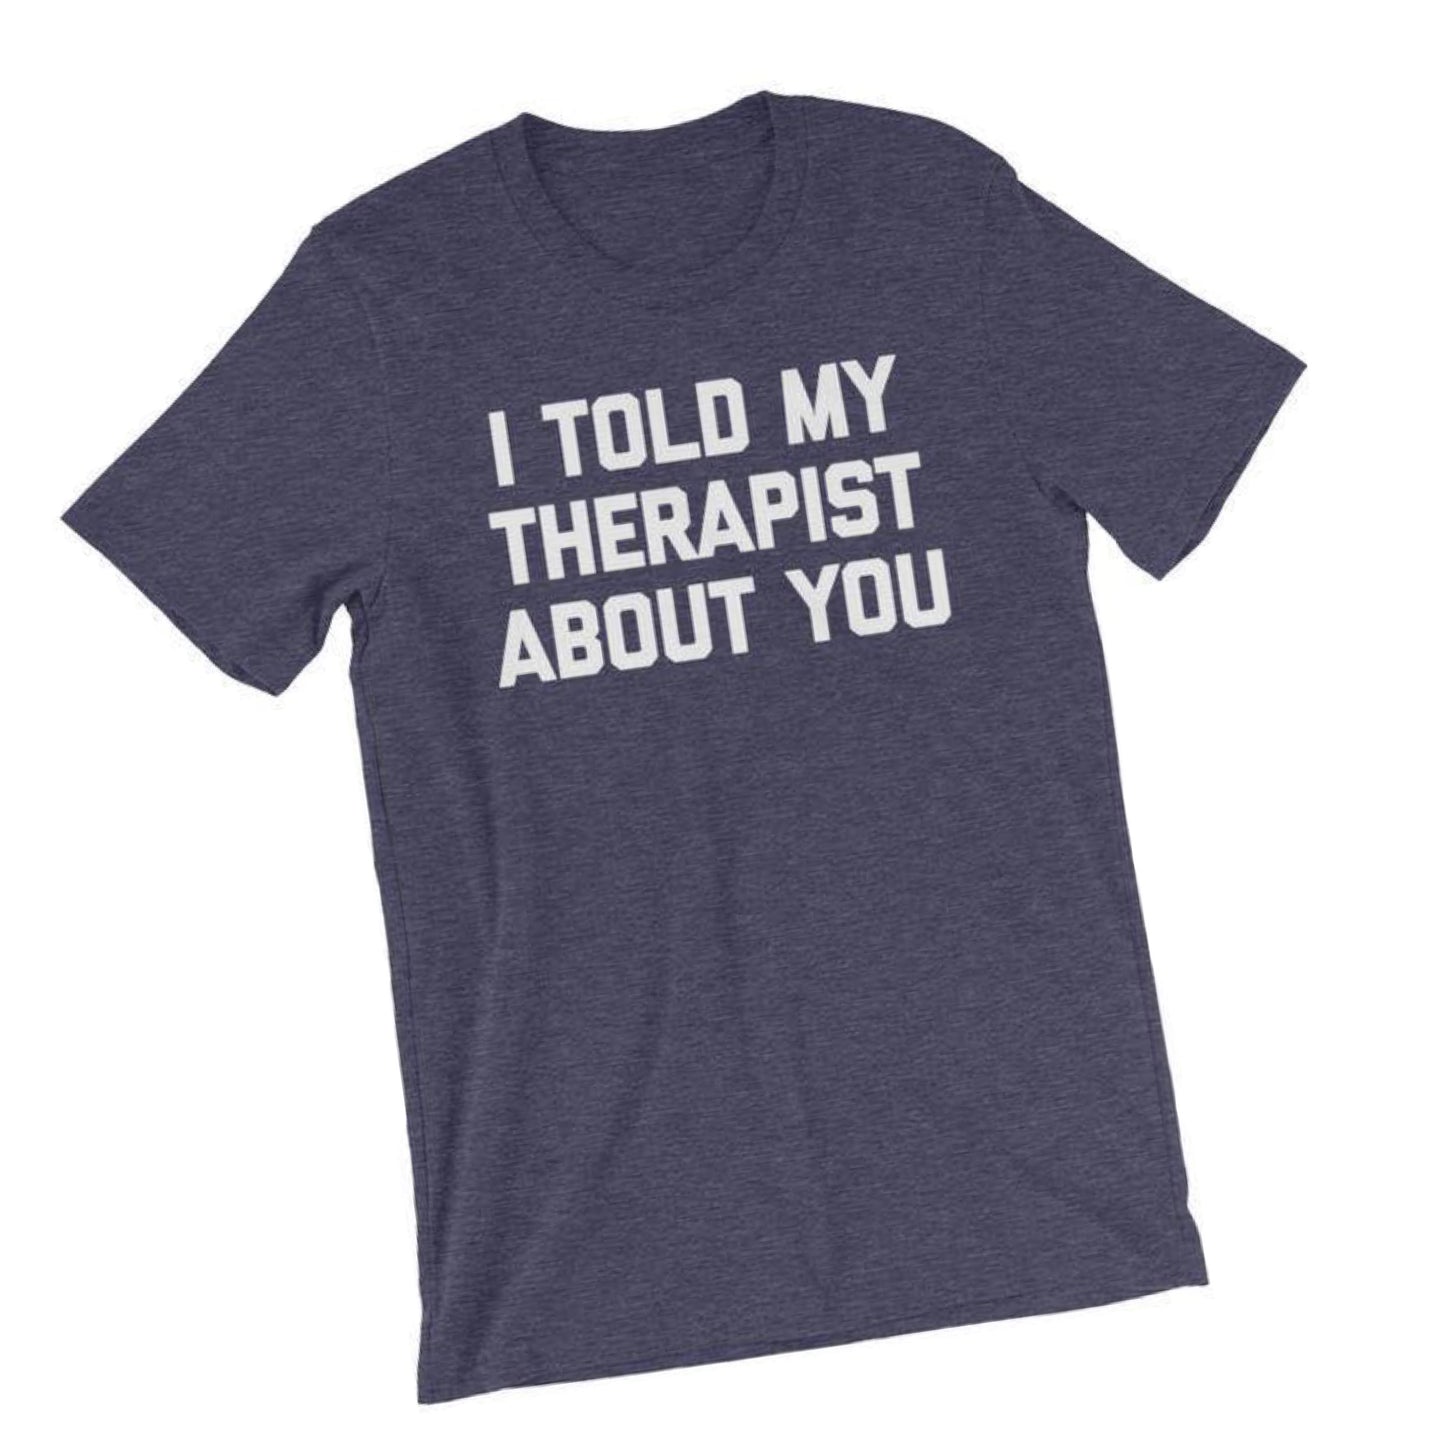 I told my therapist about you, funny shirt, graphic tee, 2020 tee, therapy shirt, therapist tee, funny gift, white elephant gift, christmas